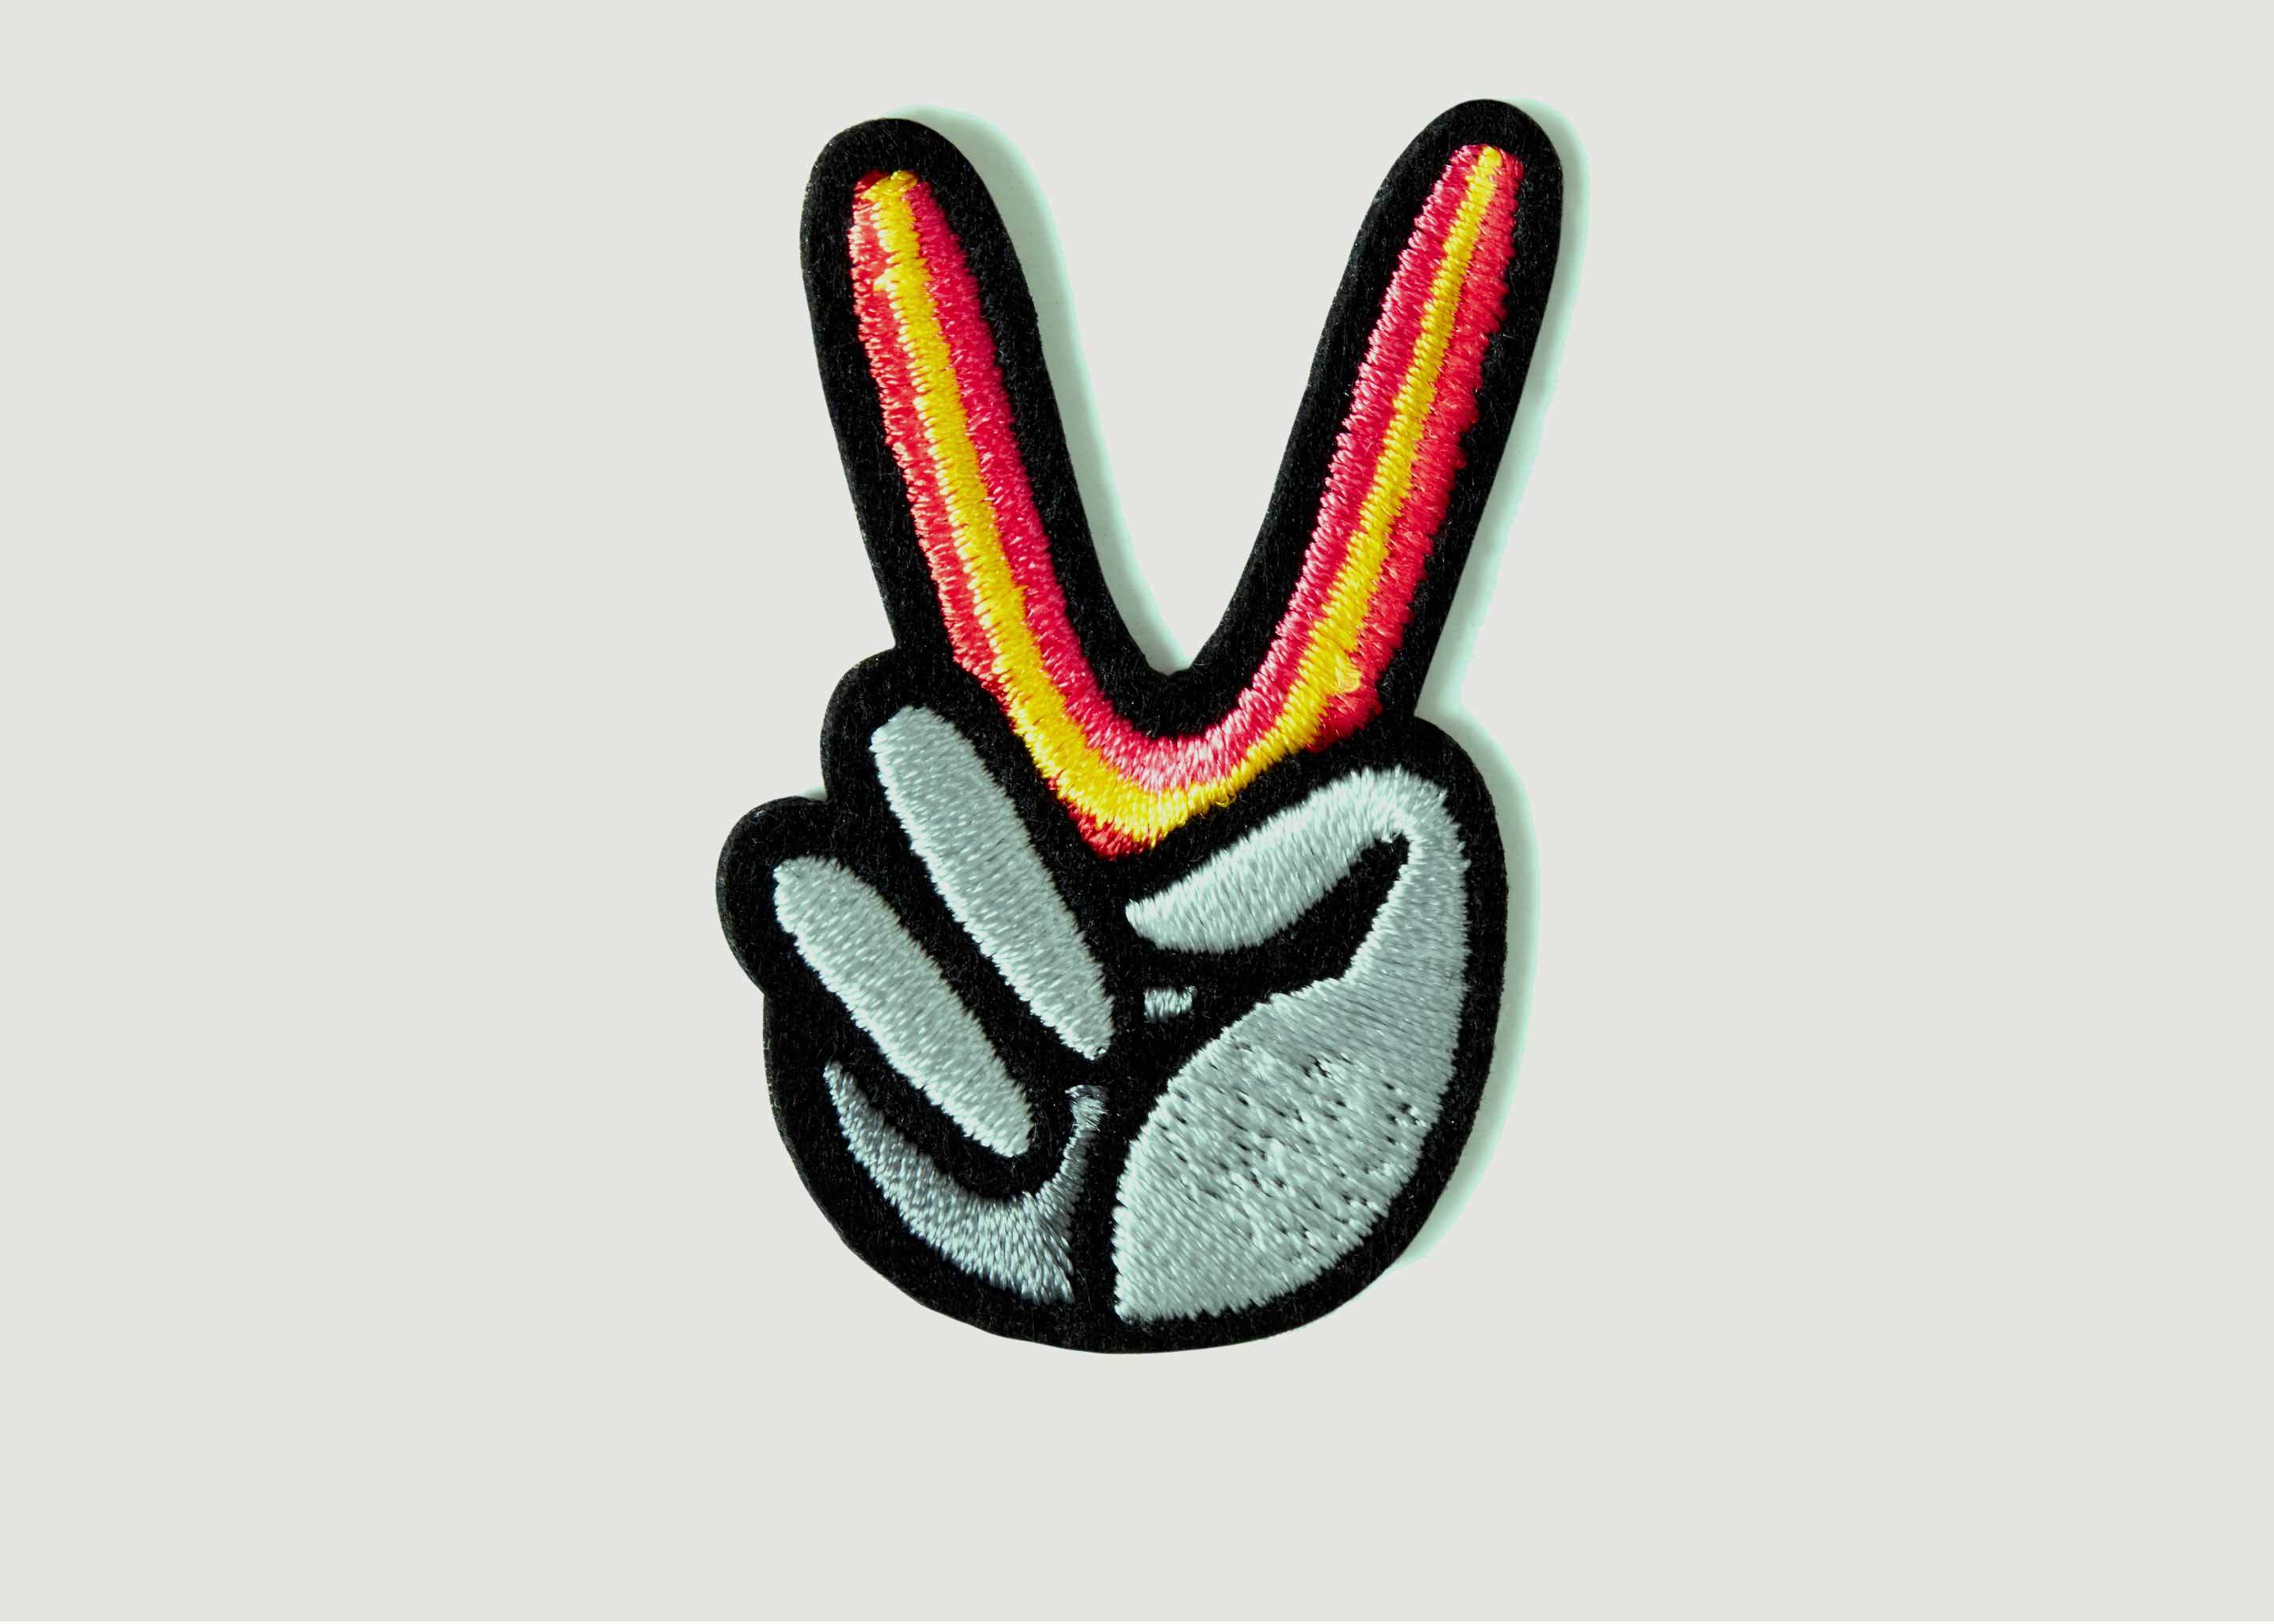 V for Victory Patch - Macon & Lesquoy